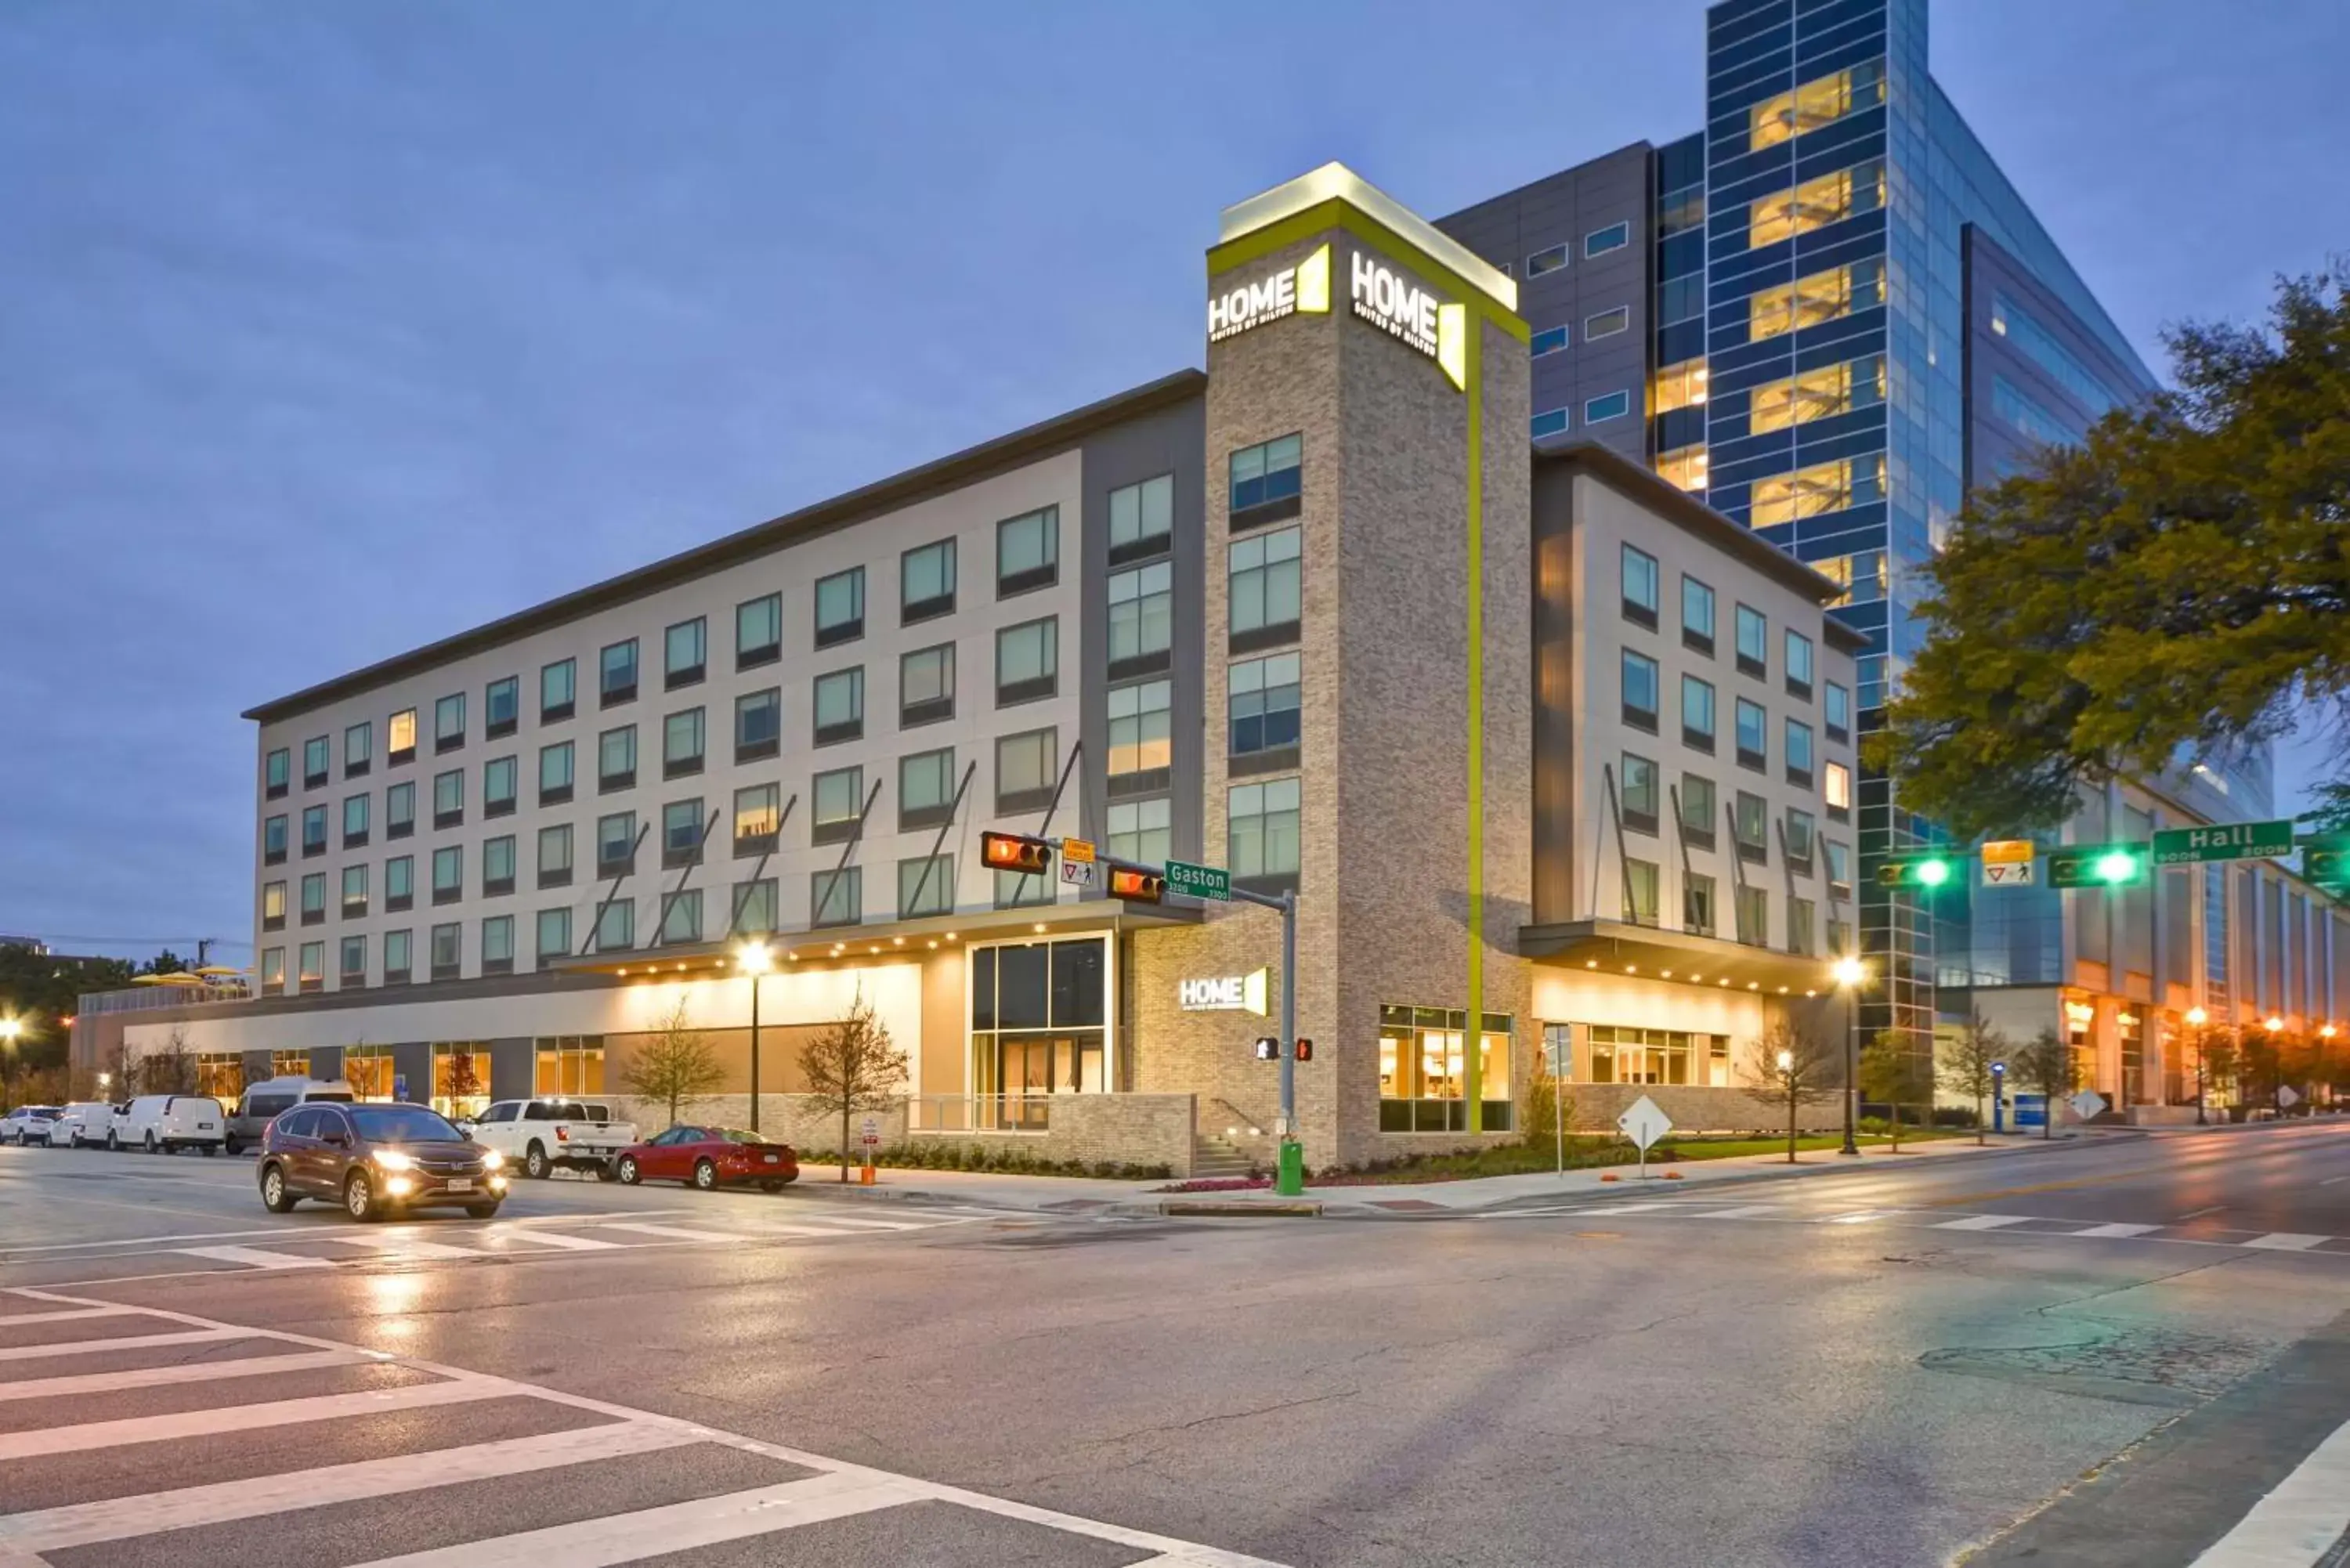 Property Building in Home2 Suites by Hilton Dallas Downtown at Baylor Scott & White